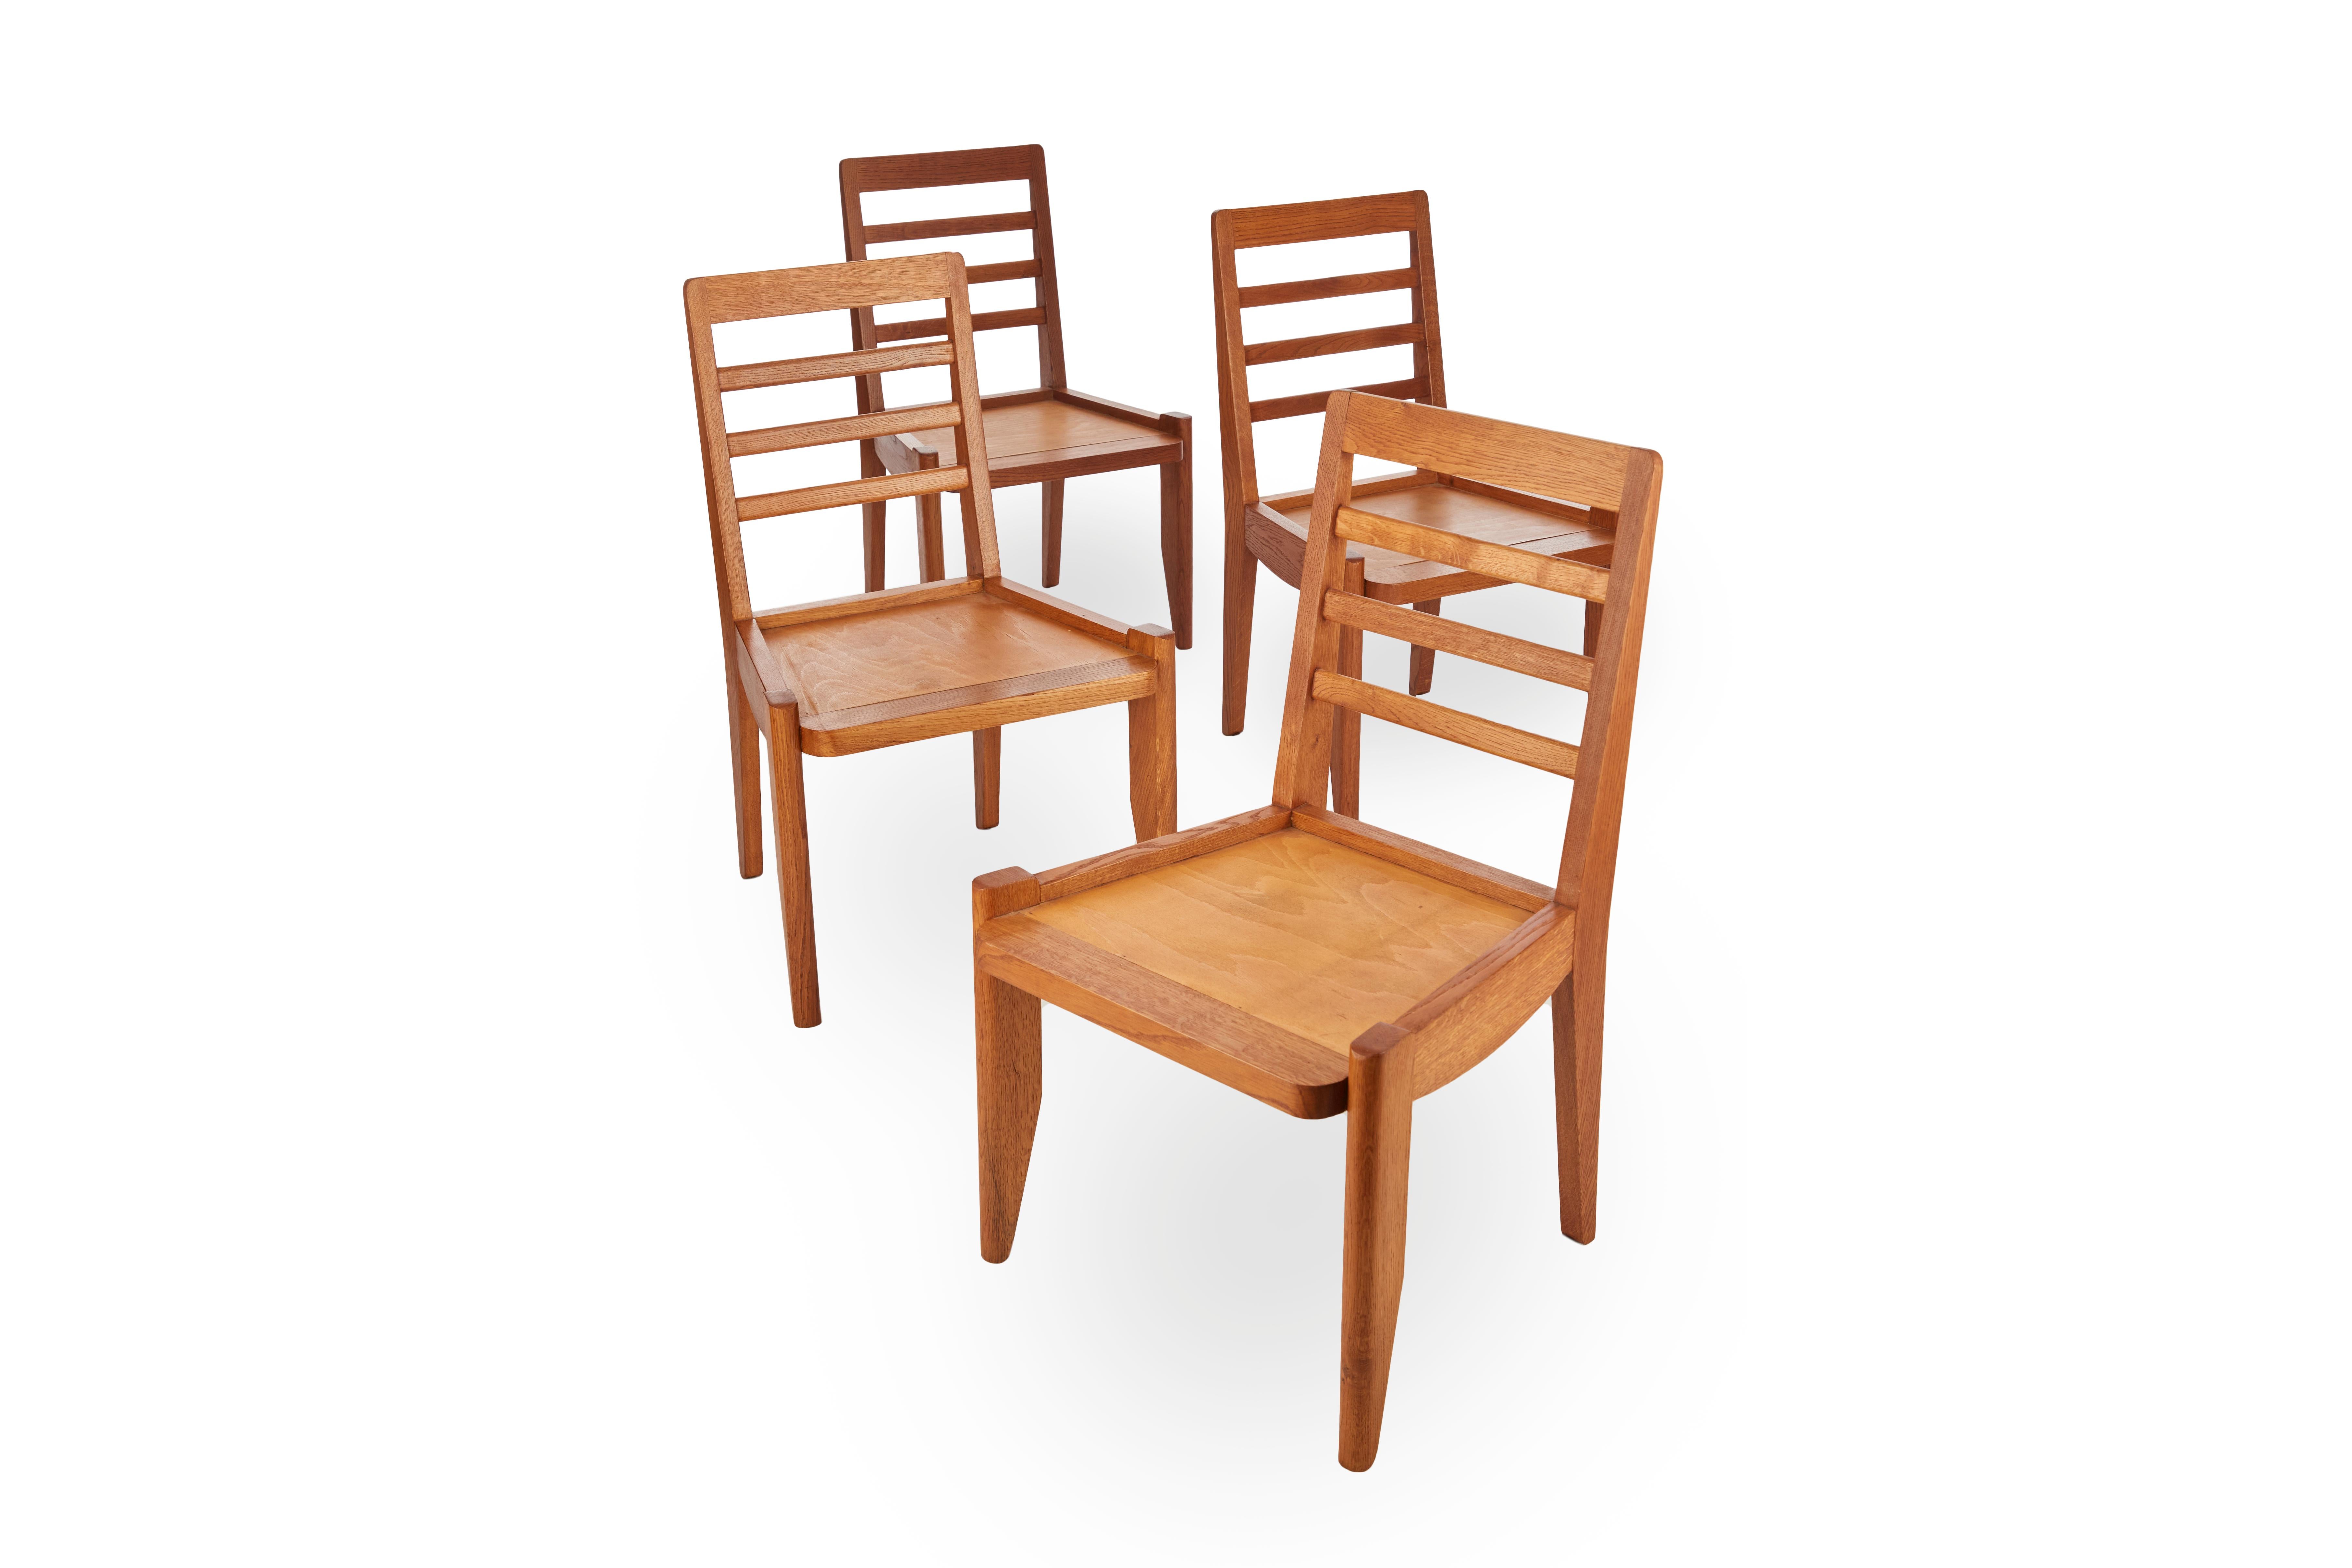 These elegant set of six polished oak dining chairs by the celebrated French designer Robert Guillerme, was created as part of a line of design he produced for the company Votre Maison.

Guillerme placed equal emphasis on function and aesthetics,